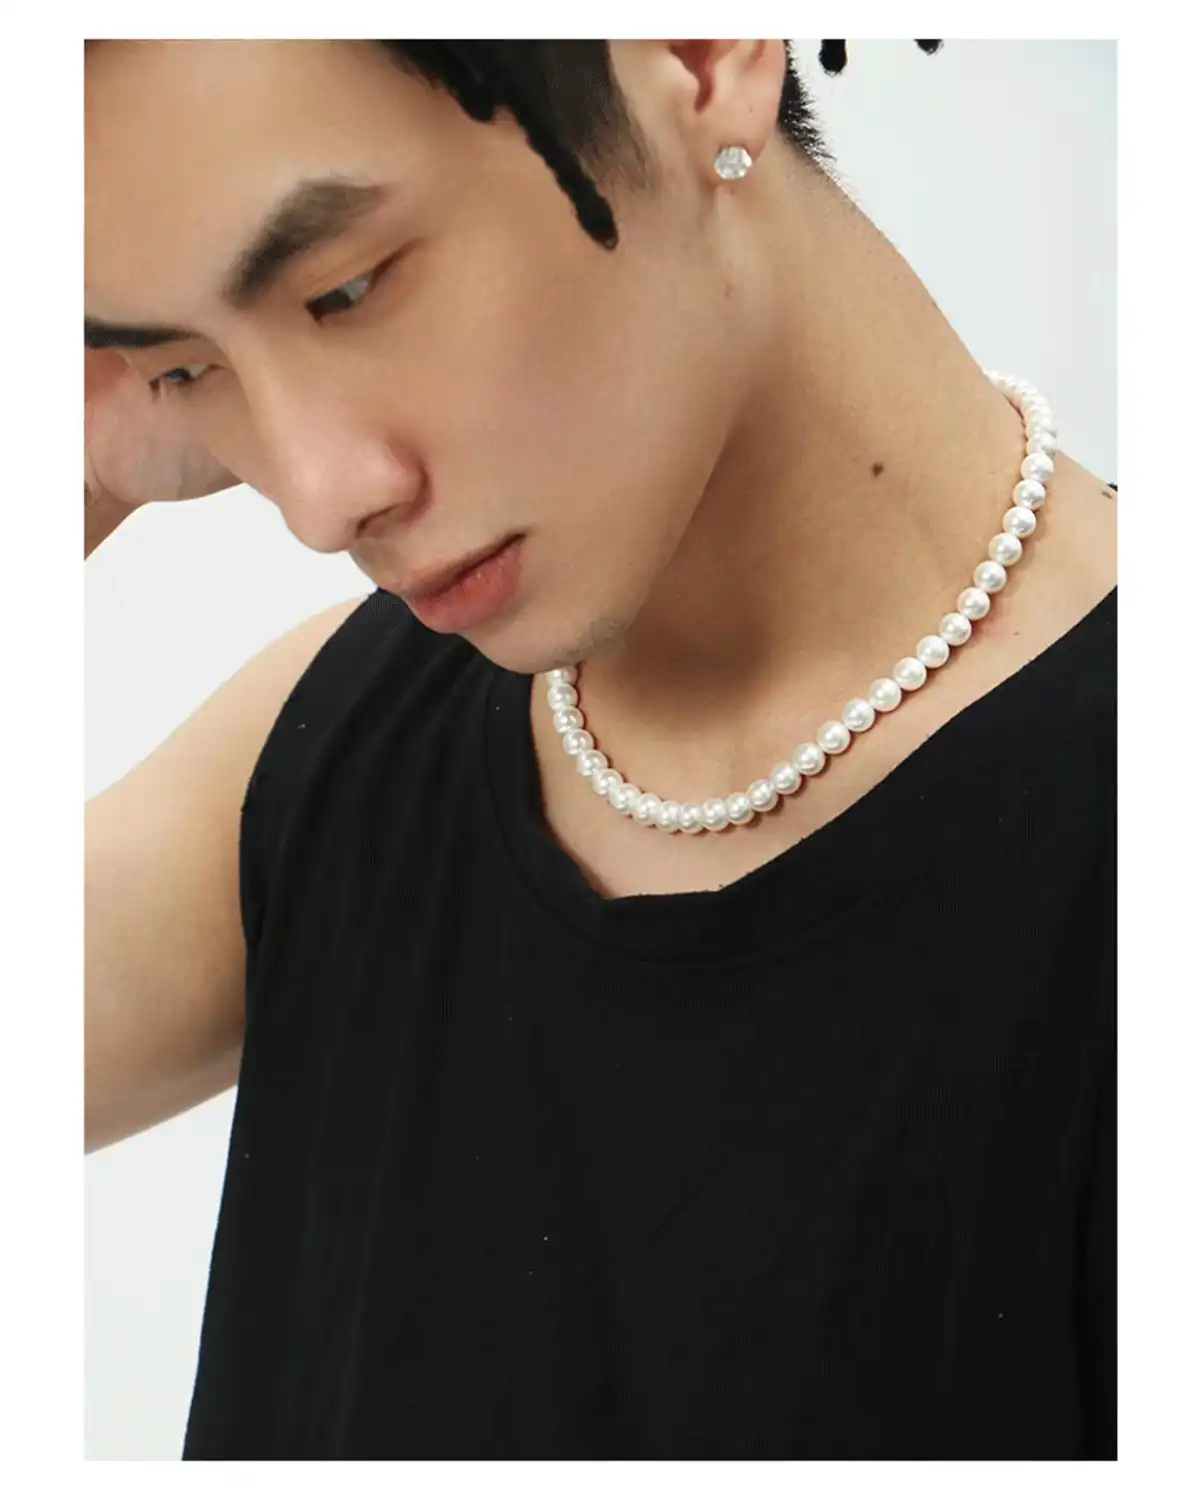 Are Pearl Necklaces In Style For Guys? – Pearls for Men